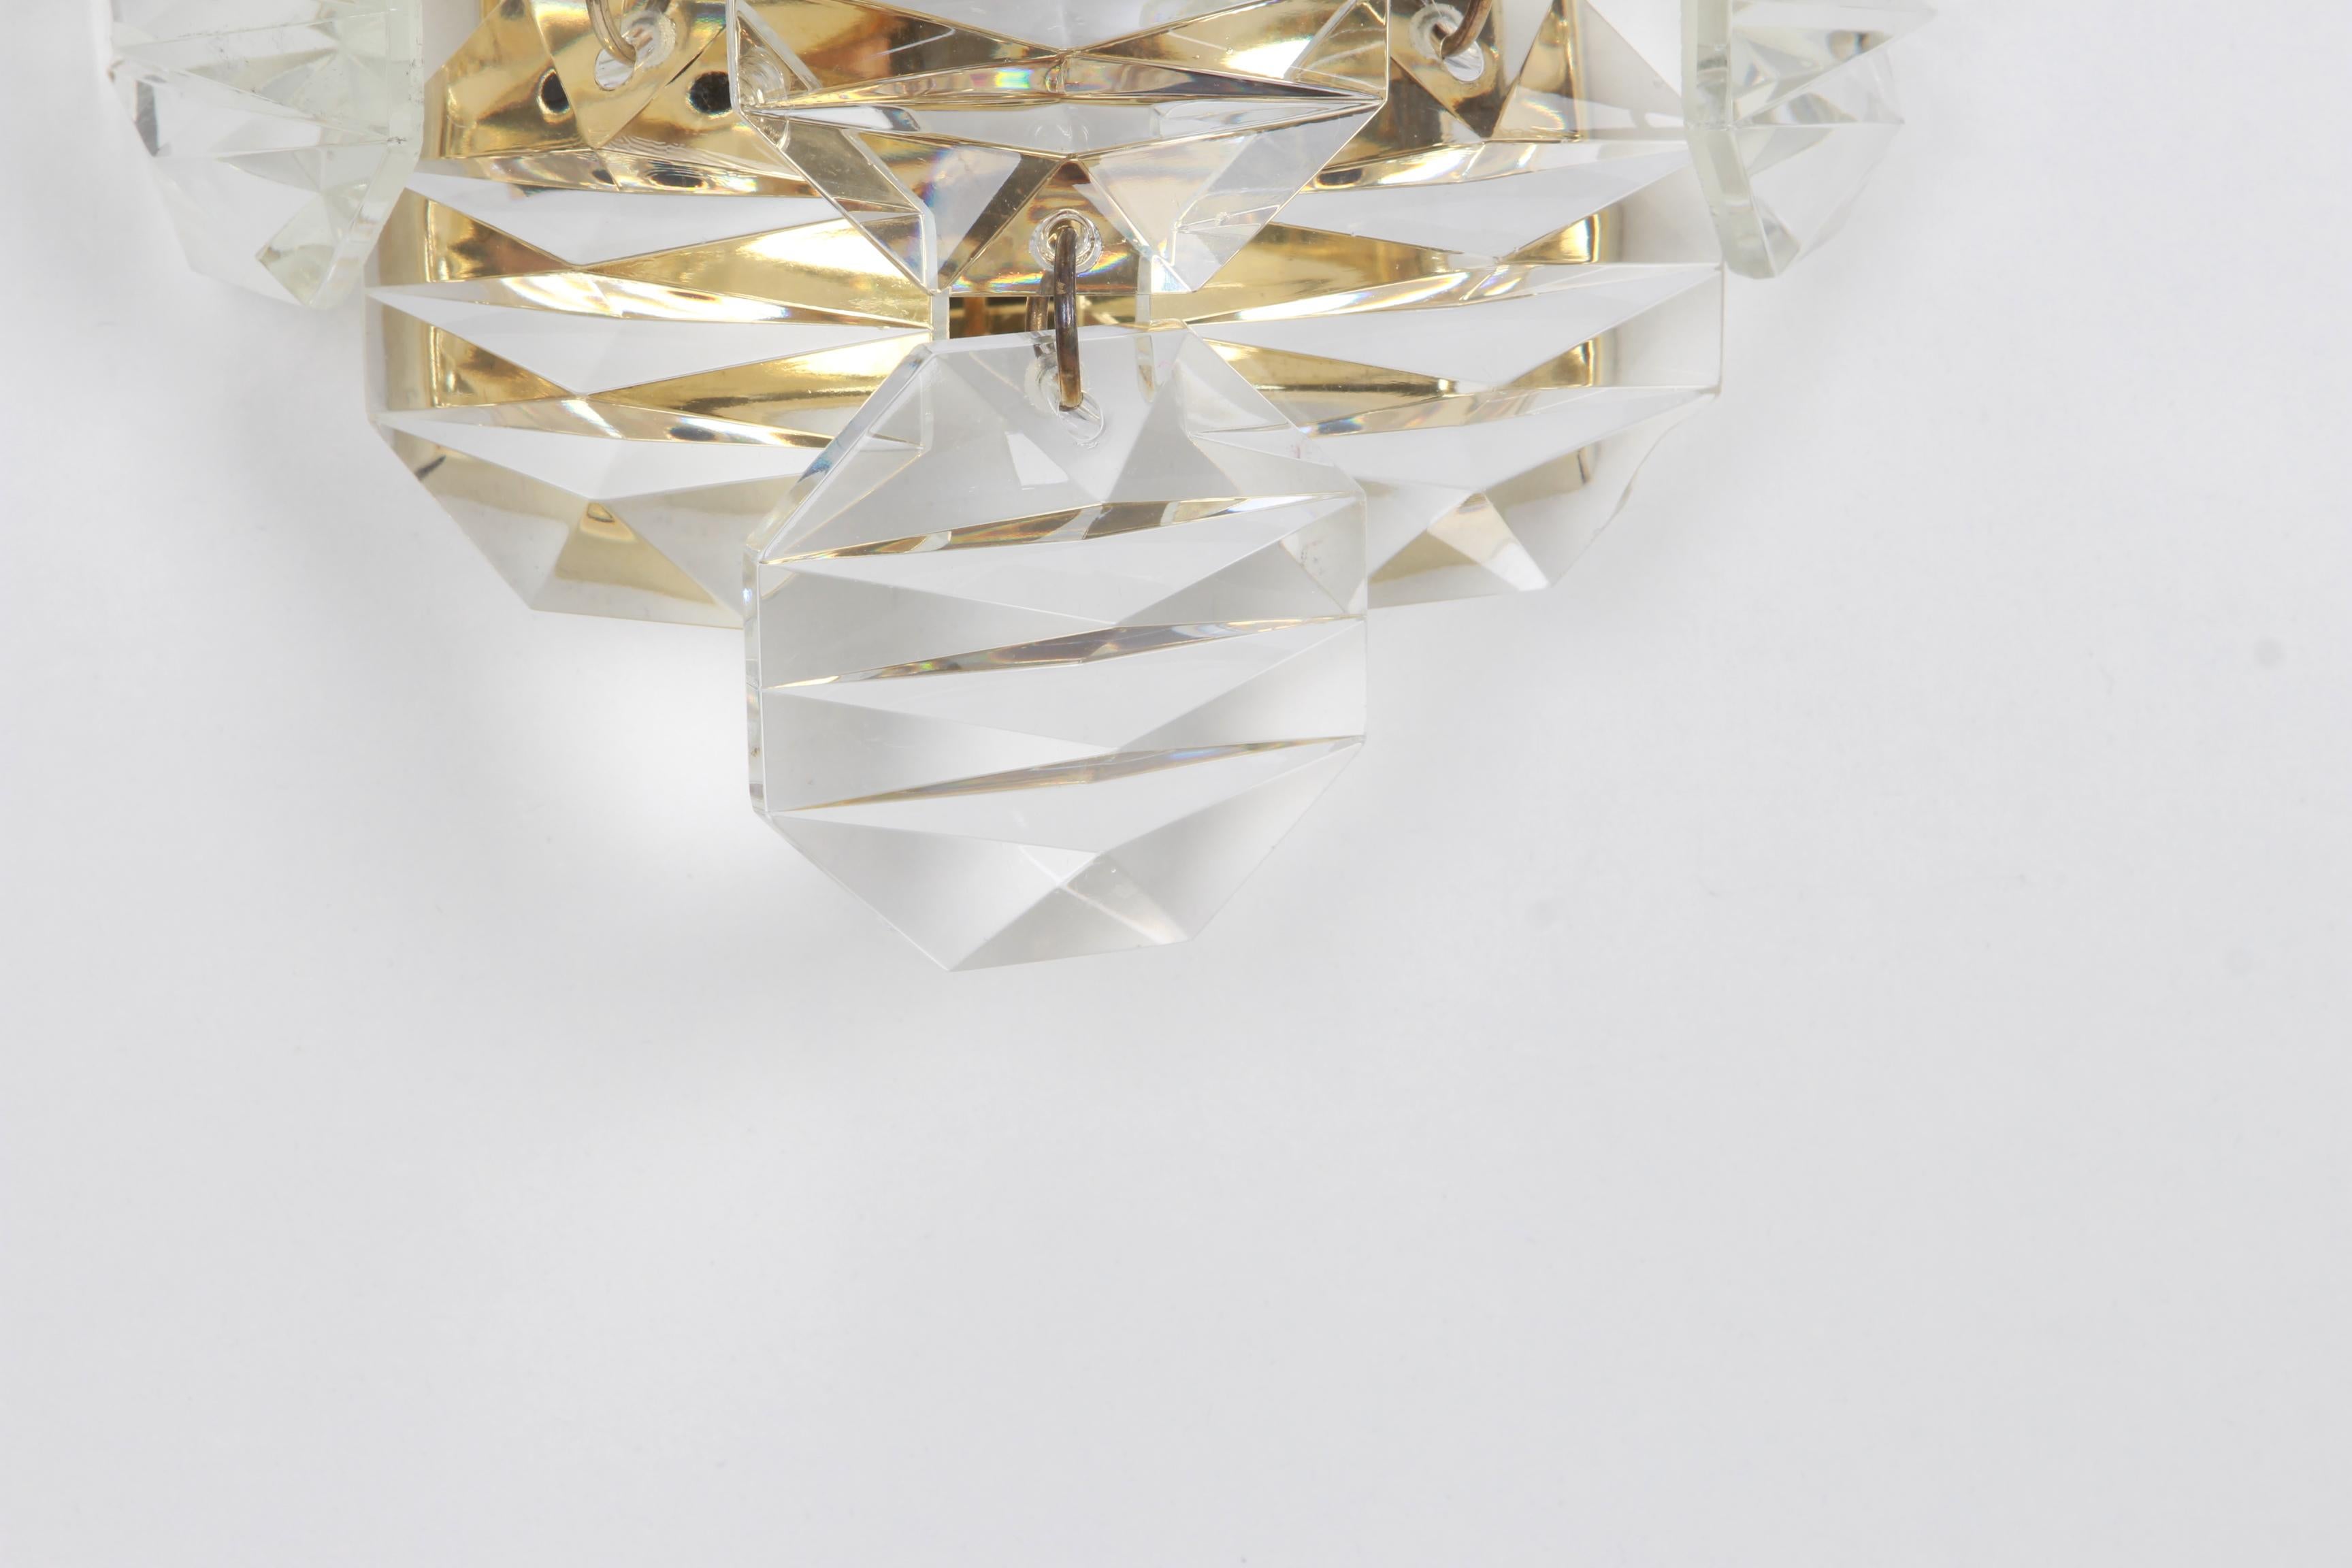 Late 20th Century 1 of 2 Sets / Stunning Crystal Sconce by Kinkeldey, Germany, 1970s For Sale